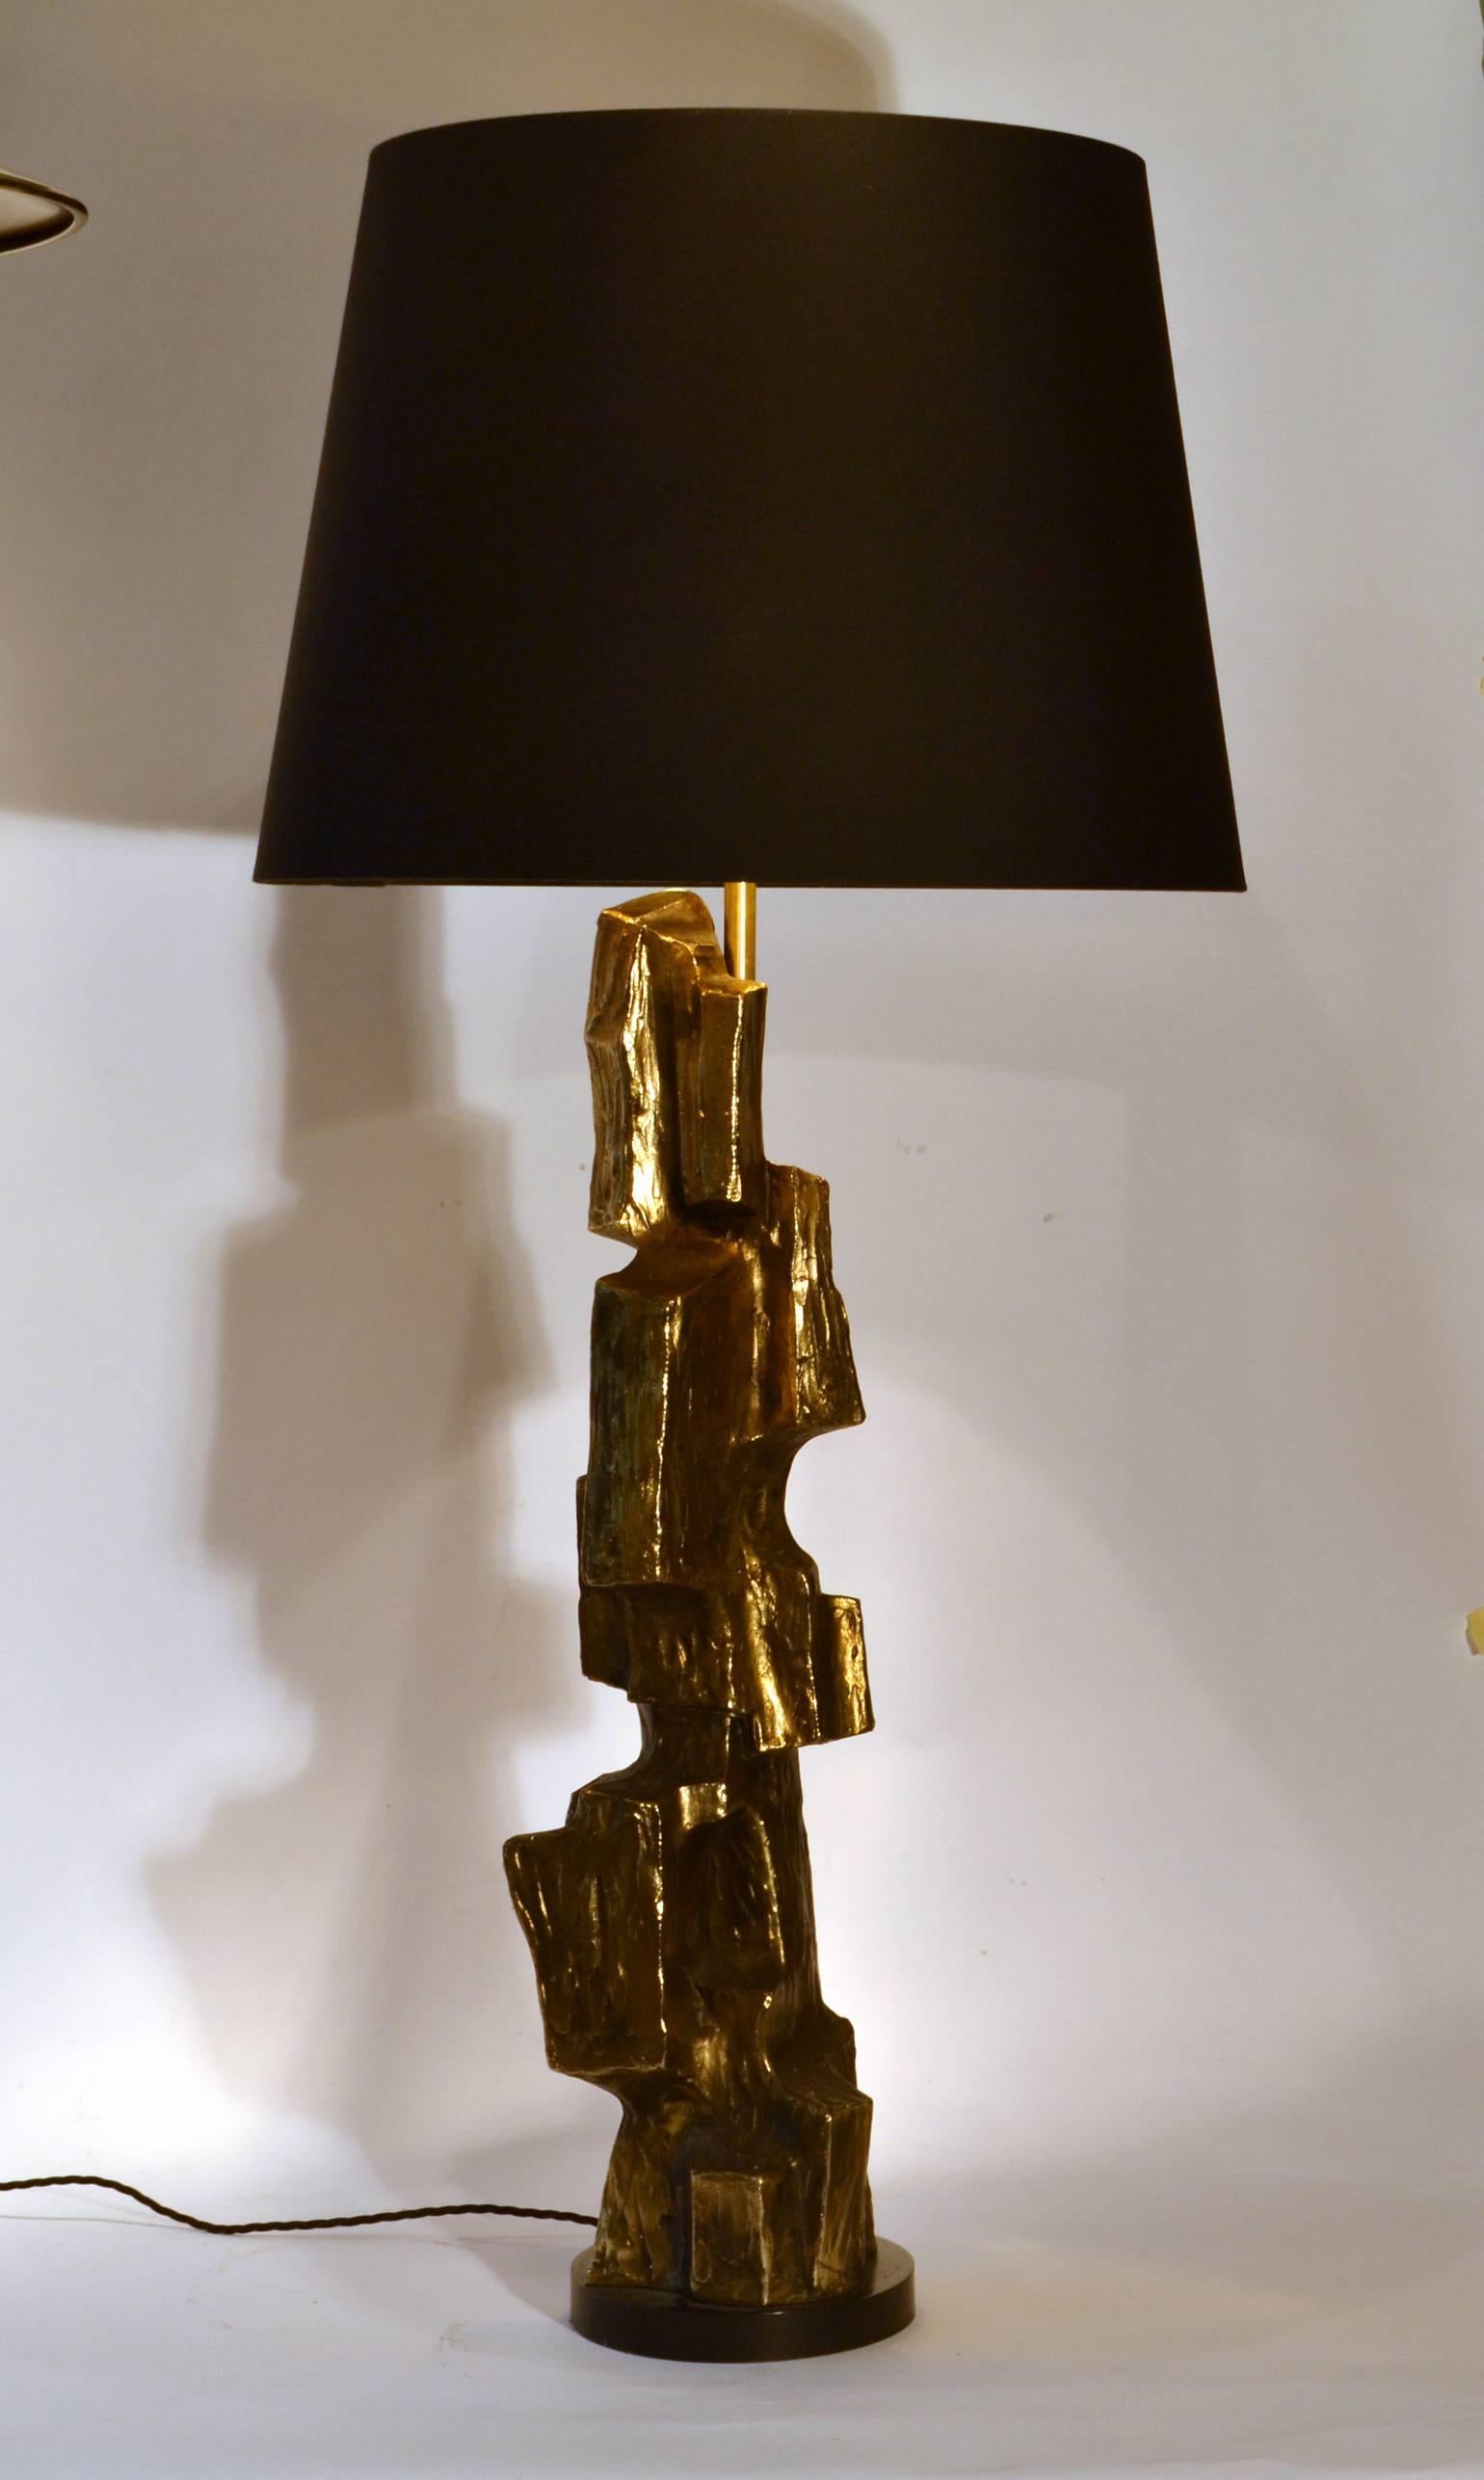 Tall sculptural almost cubist sculptural lamp base in Brutalist style, finished in bronze patina over textural cast metal body. Base is wood finished in satin black lacquer. Brutalist table lamp designed by Maurizio Tempestini for Laurel Lamp